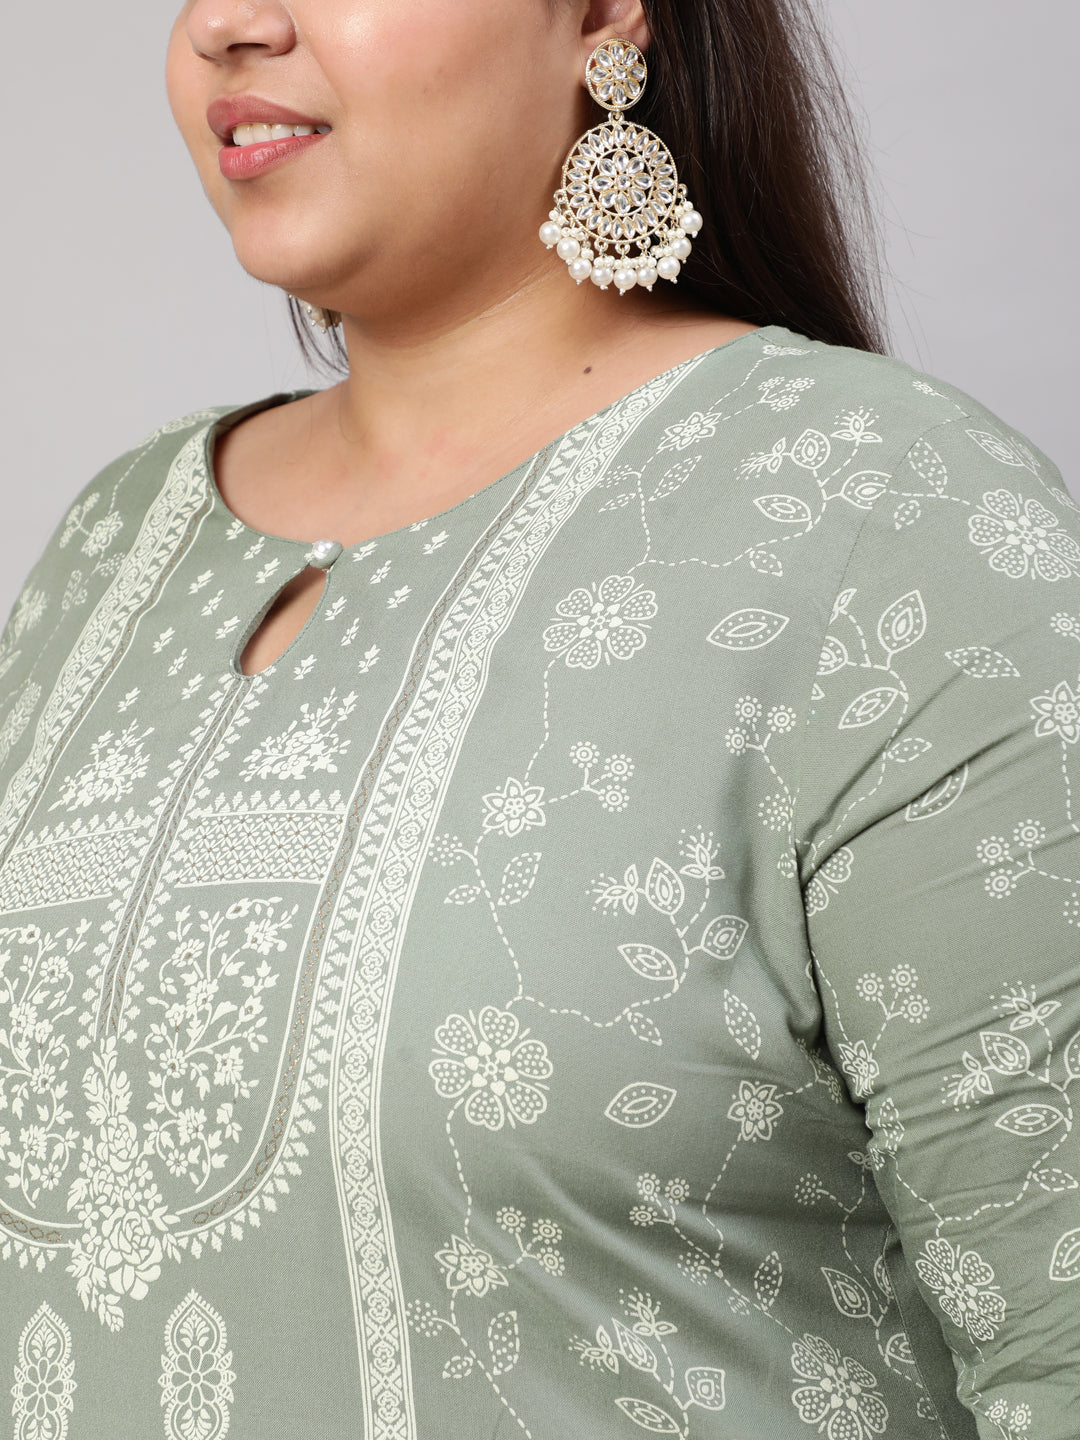 Plus Size Olive Green Placement Printed Straight Kurta With Solid Palazzo And Chinon Dupatta